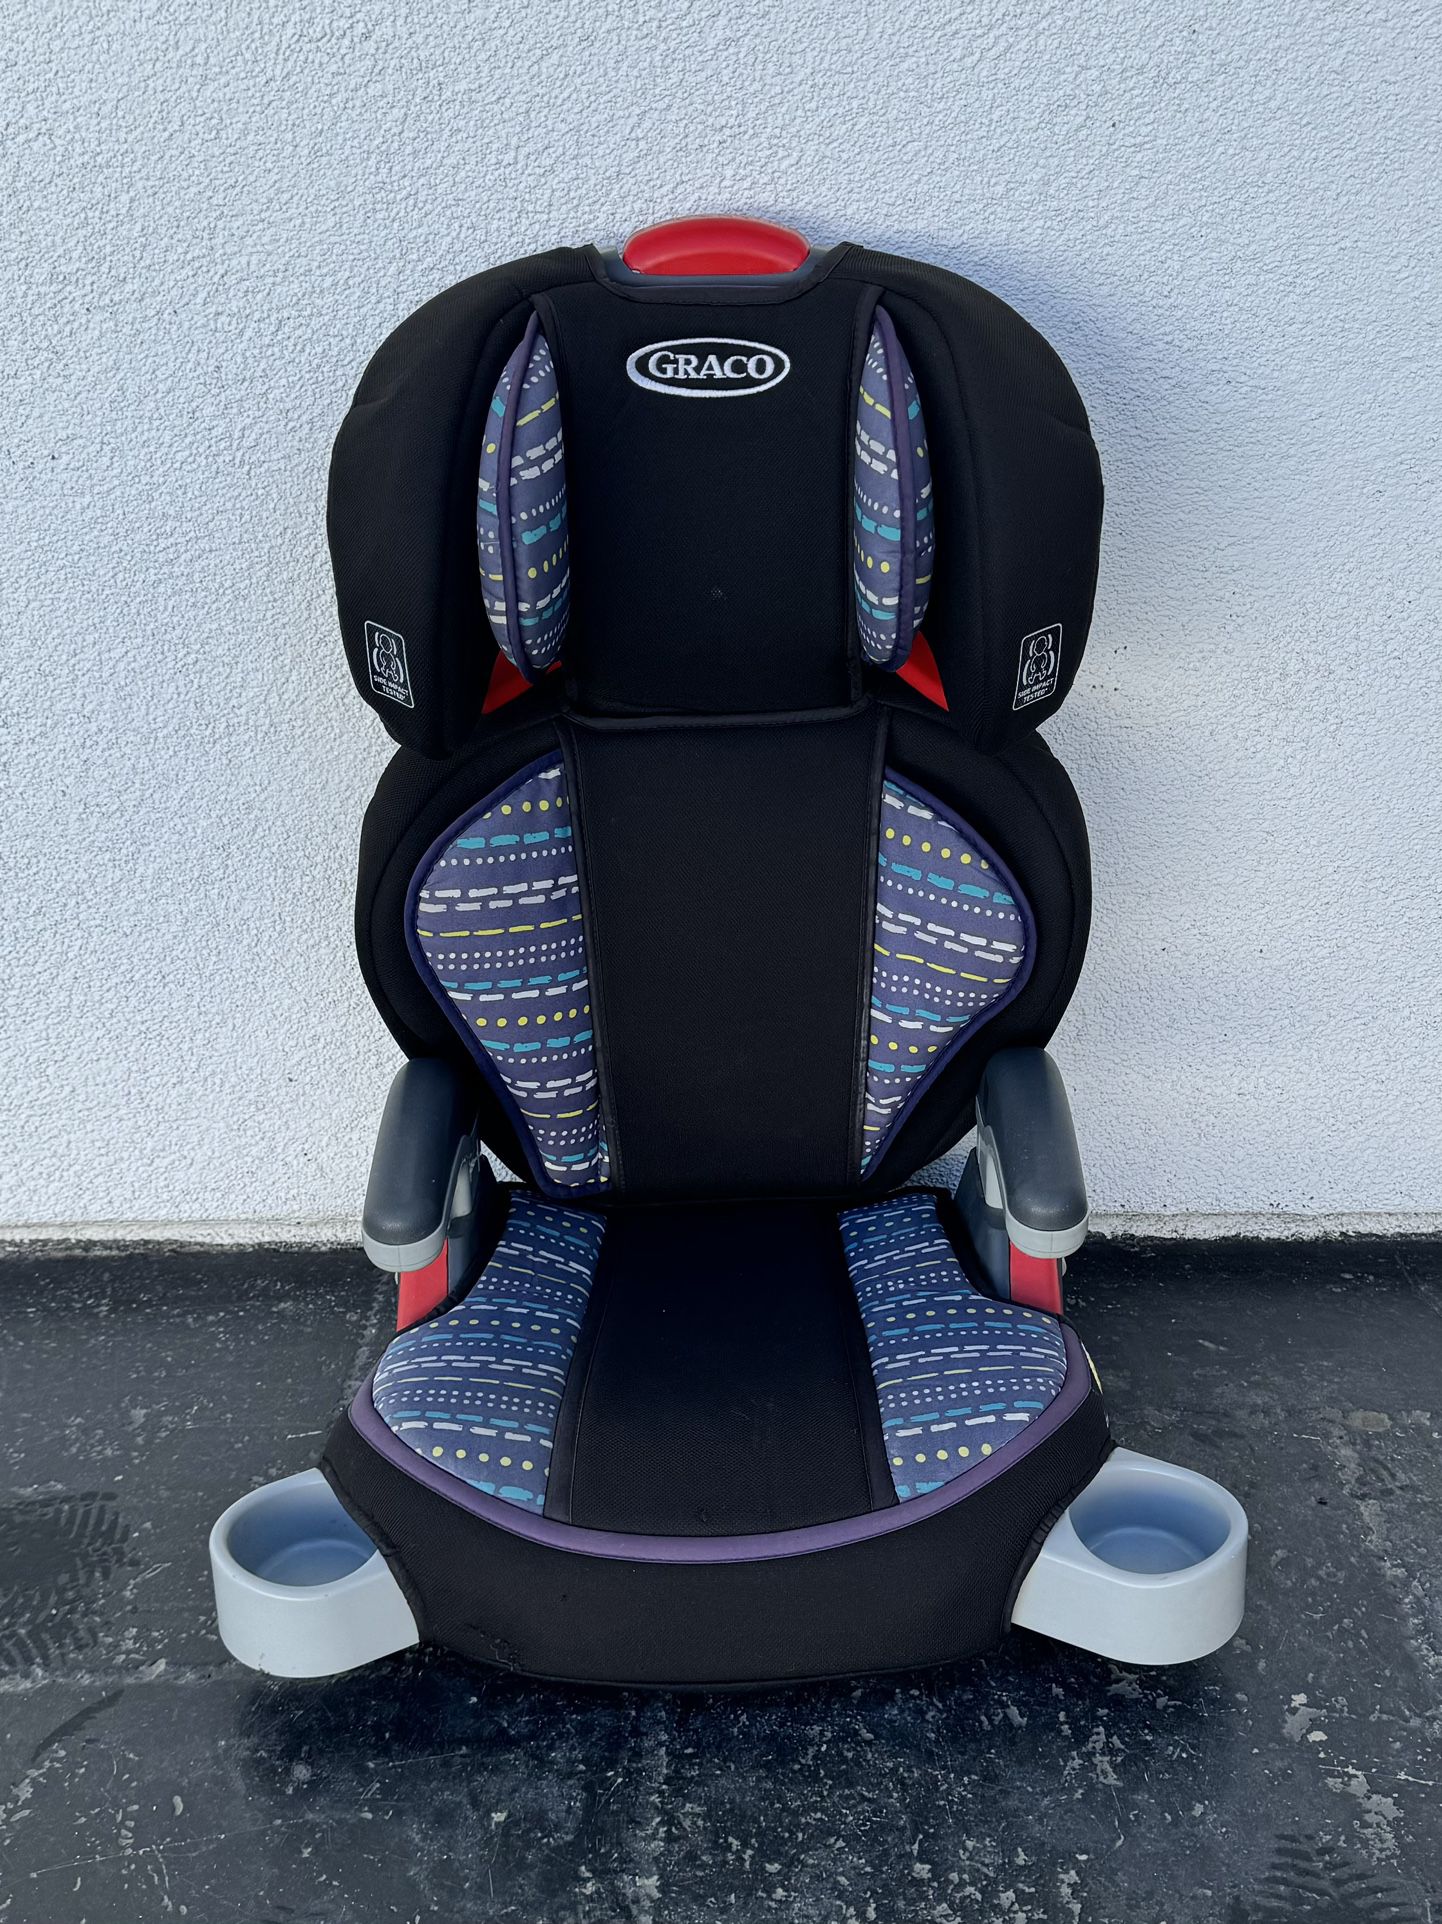 PRACTICALLY NEW GRACO HIGH BACK TURBO BOOSTER SEAT!!